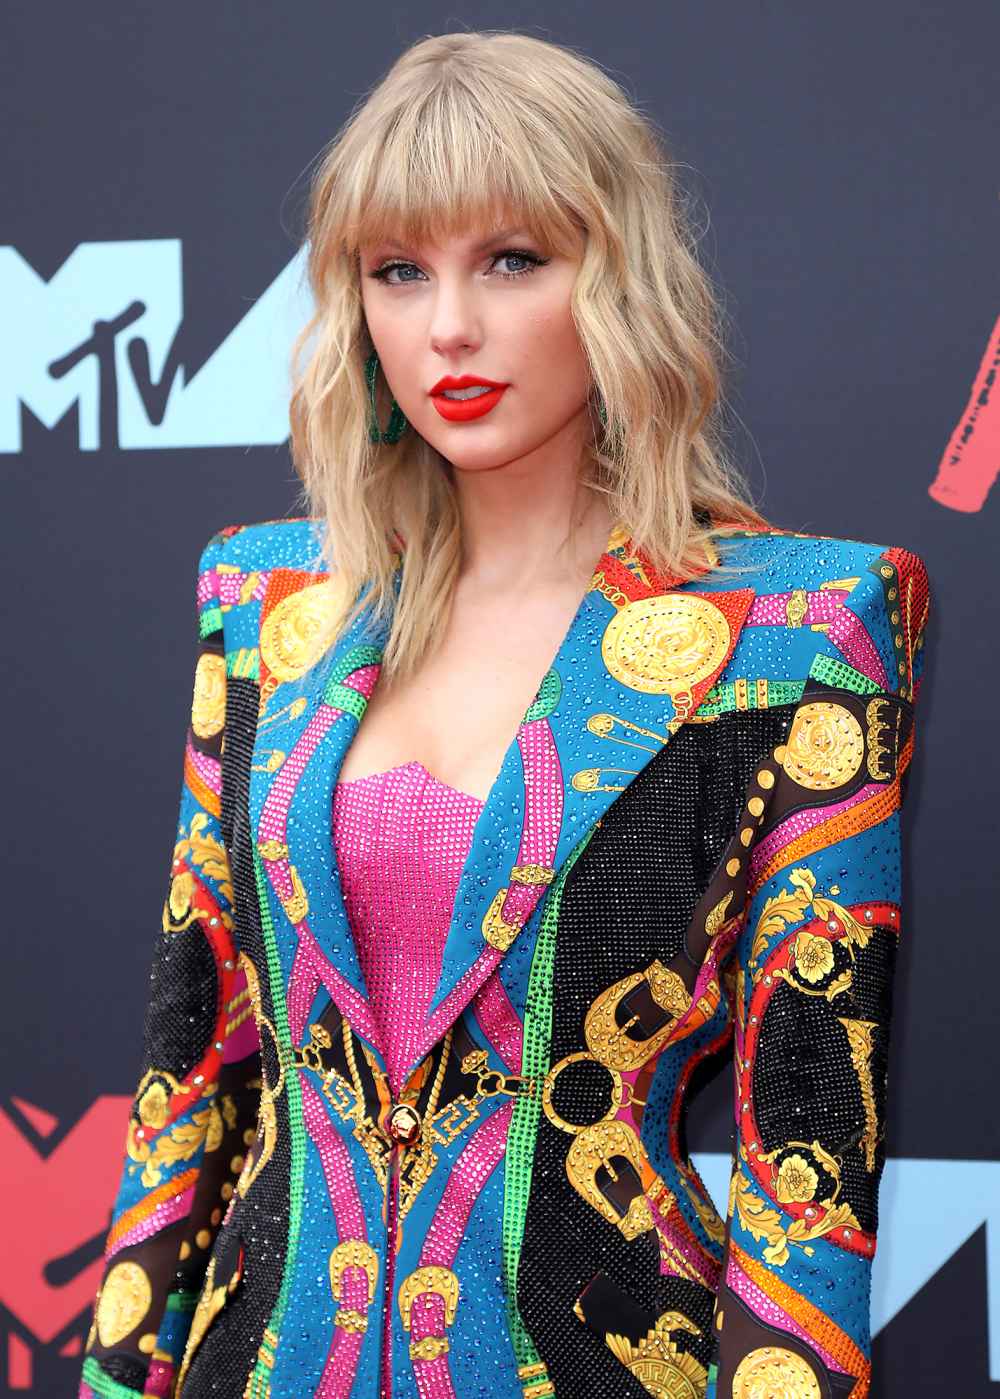 Taylor Swift Finally Reveals Why She's Written Music Under Her Nils Sjoberg Pseudonym